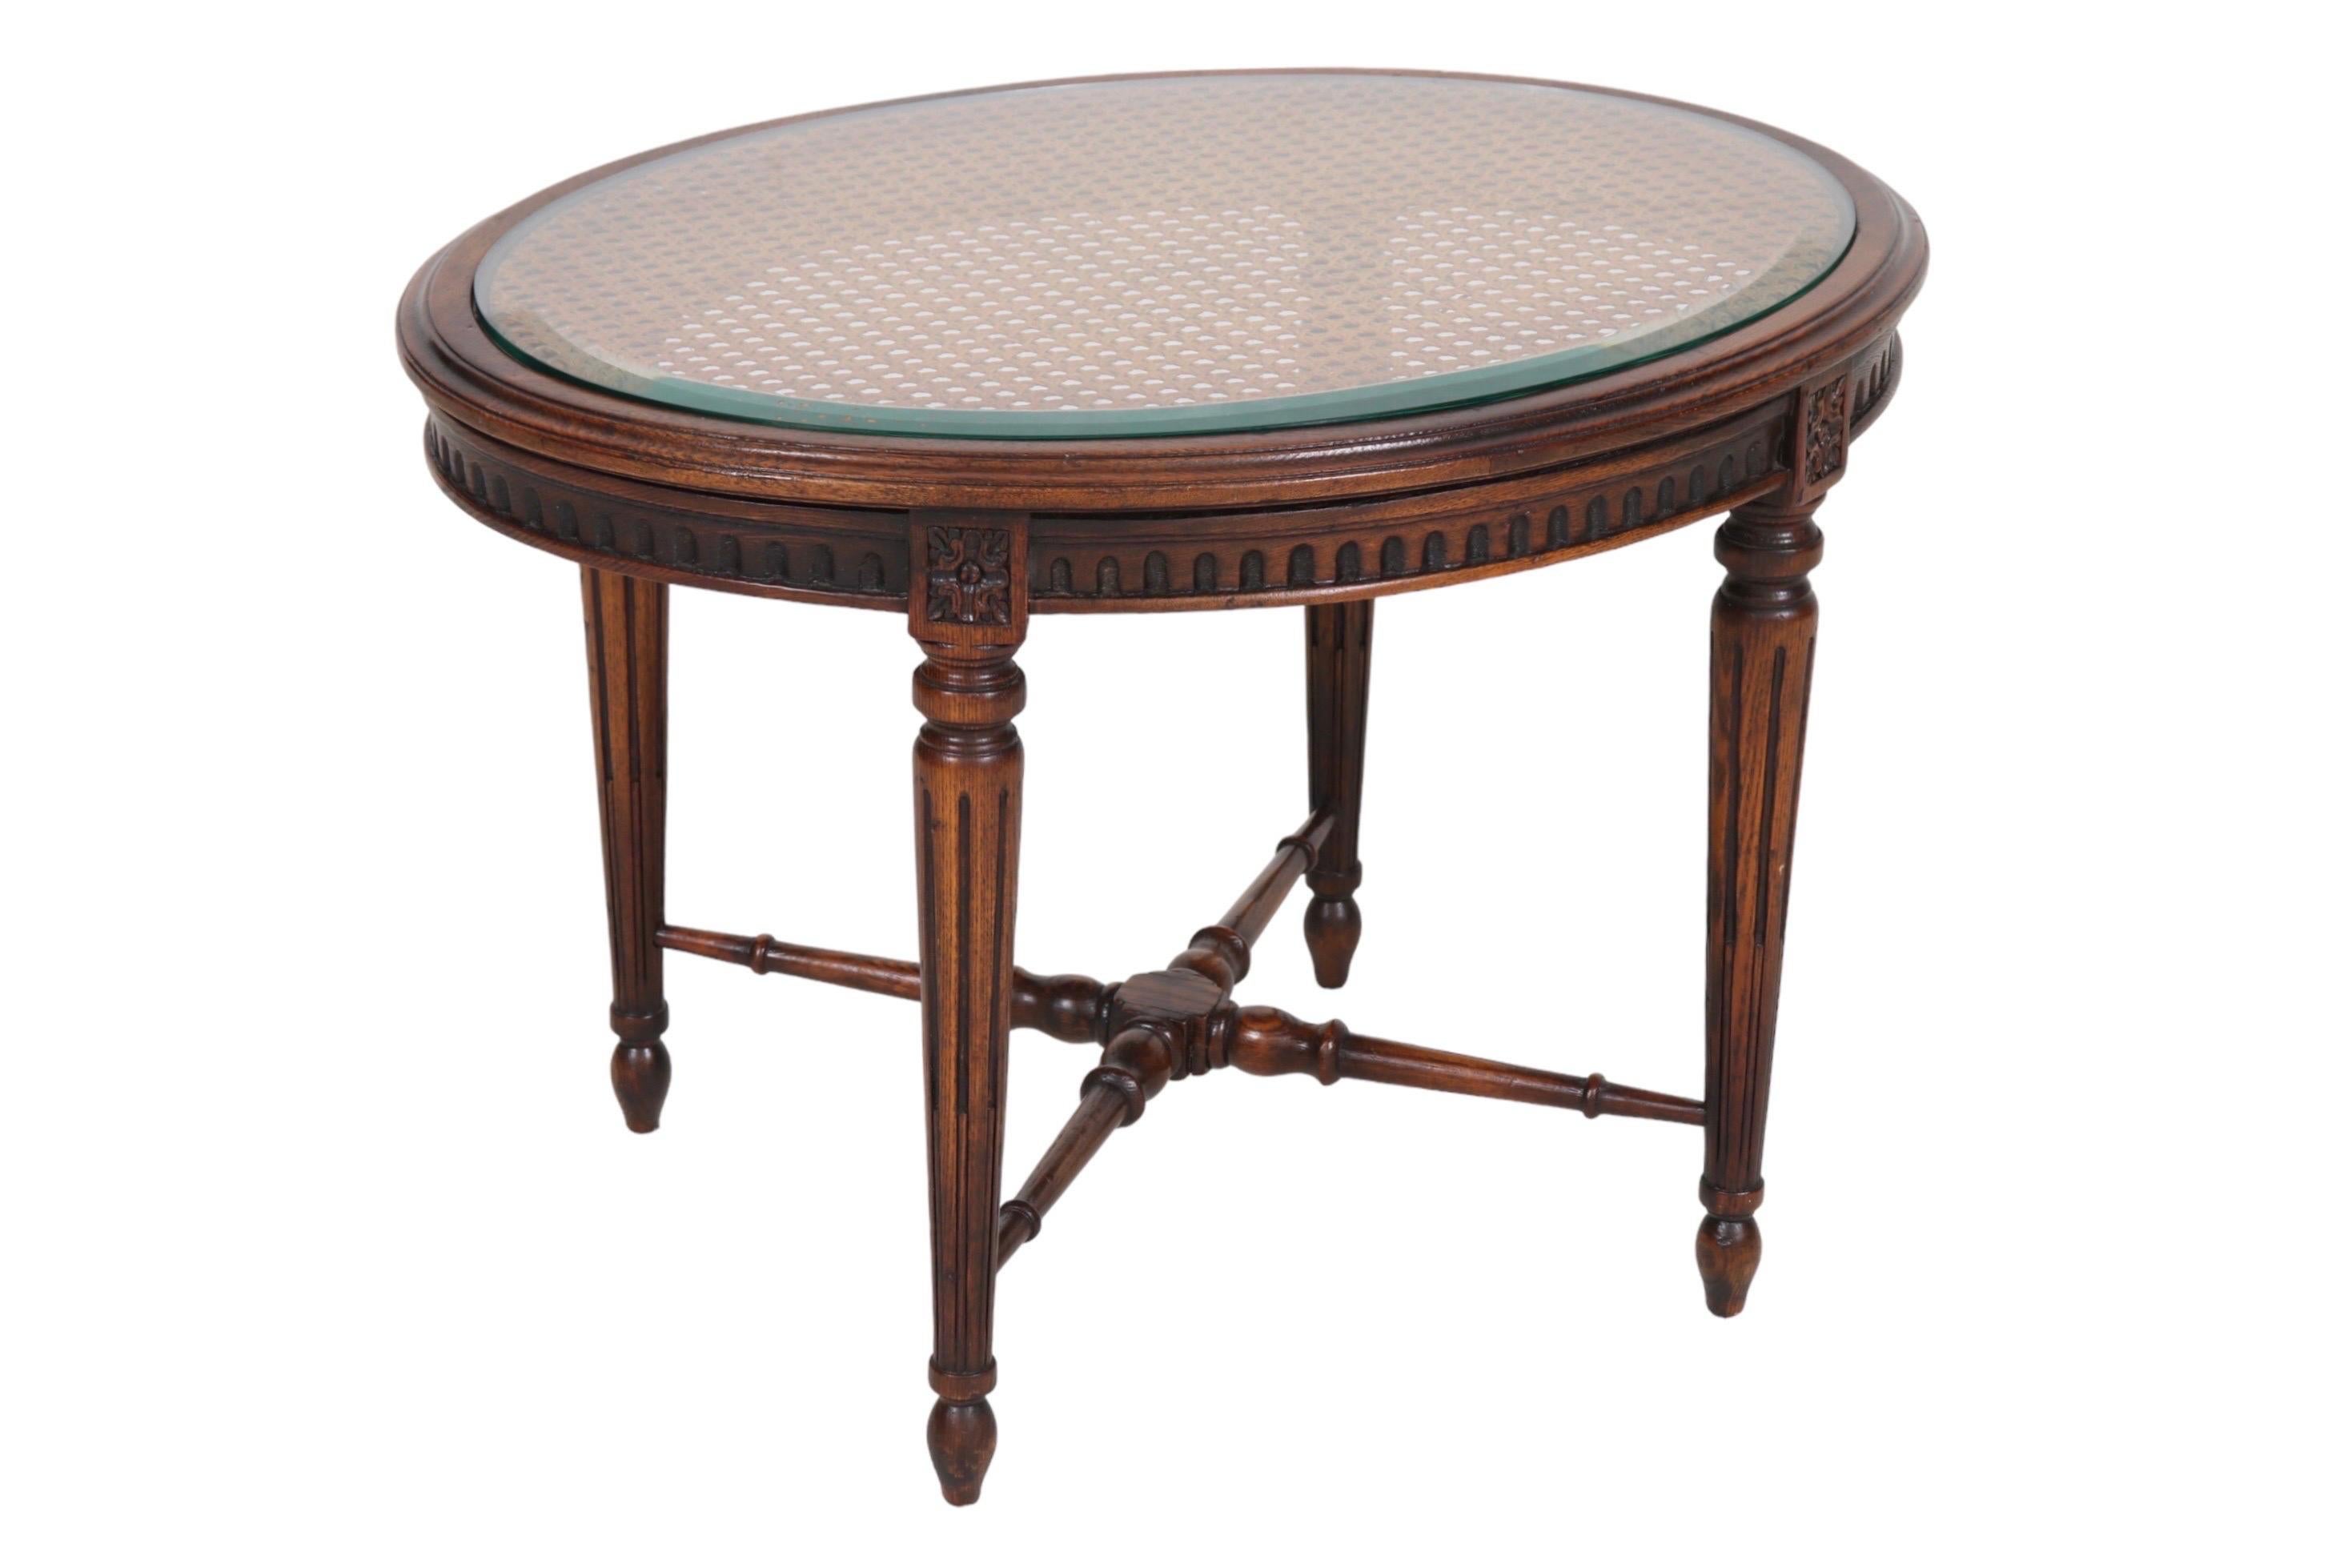 A Louis XVI style oval accent table. The caned tabletop is covered with a beveled glass top. Round tapered legs are fluted, topped with rosettes carved in squares, and finish in turnip feet. Legs are supported with a turned x-stretcher.